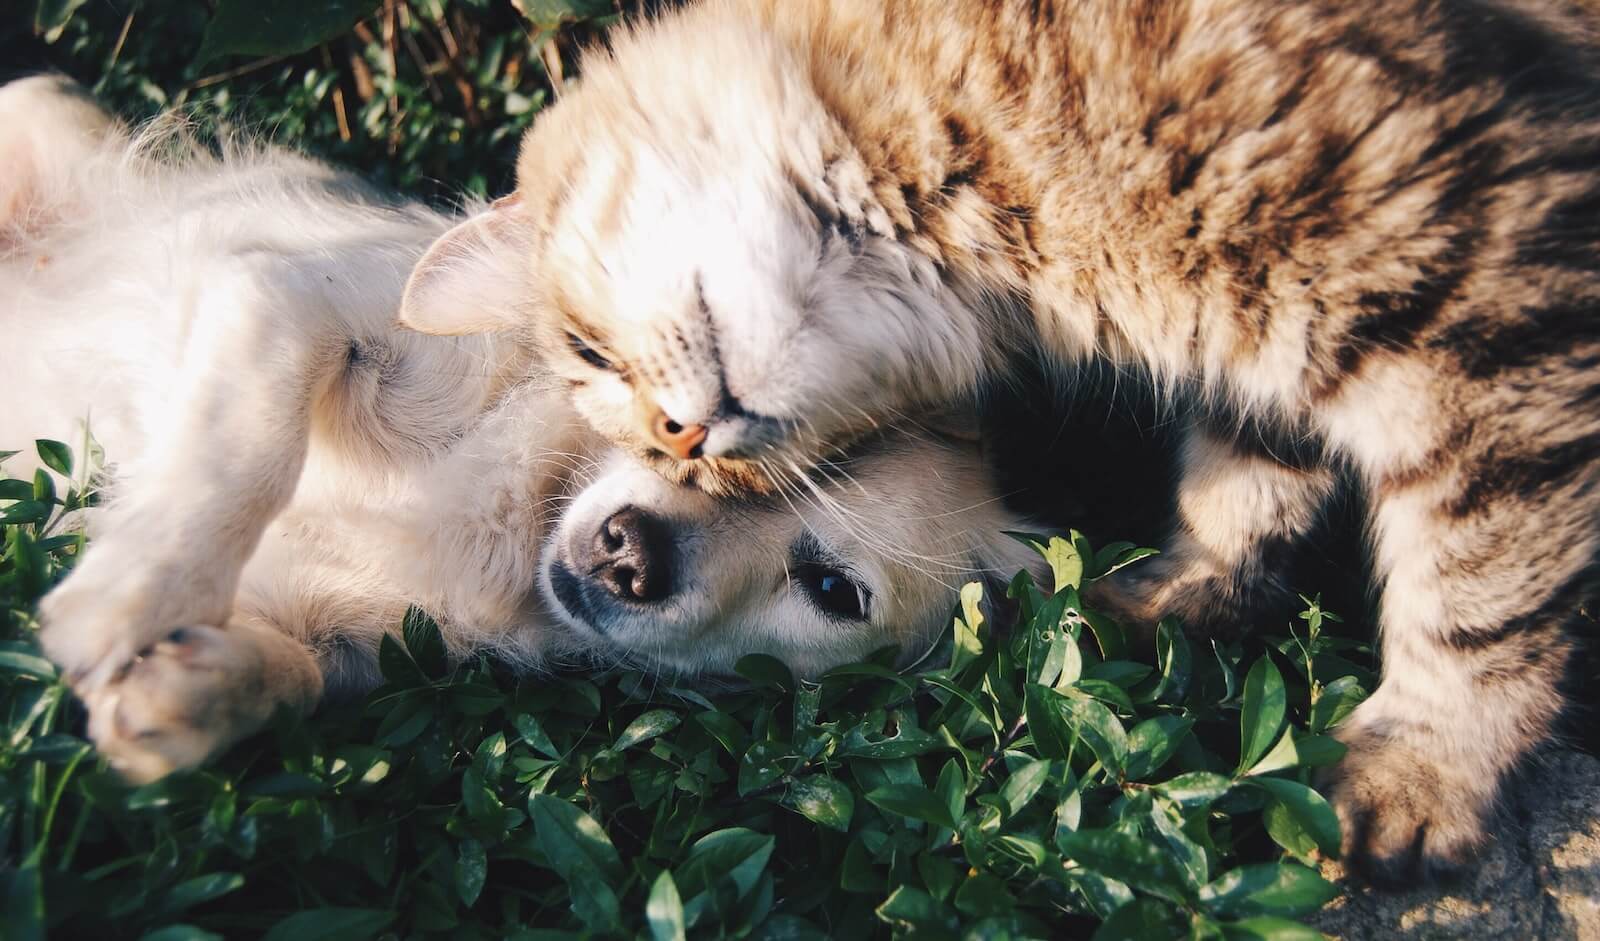 A dog and cat cuddling in the grass